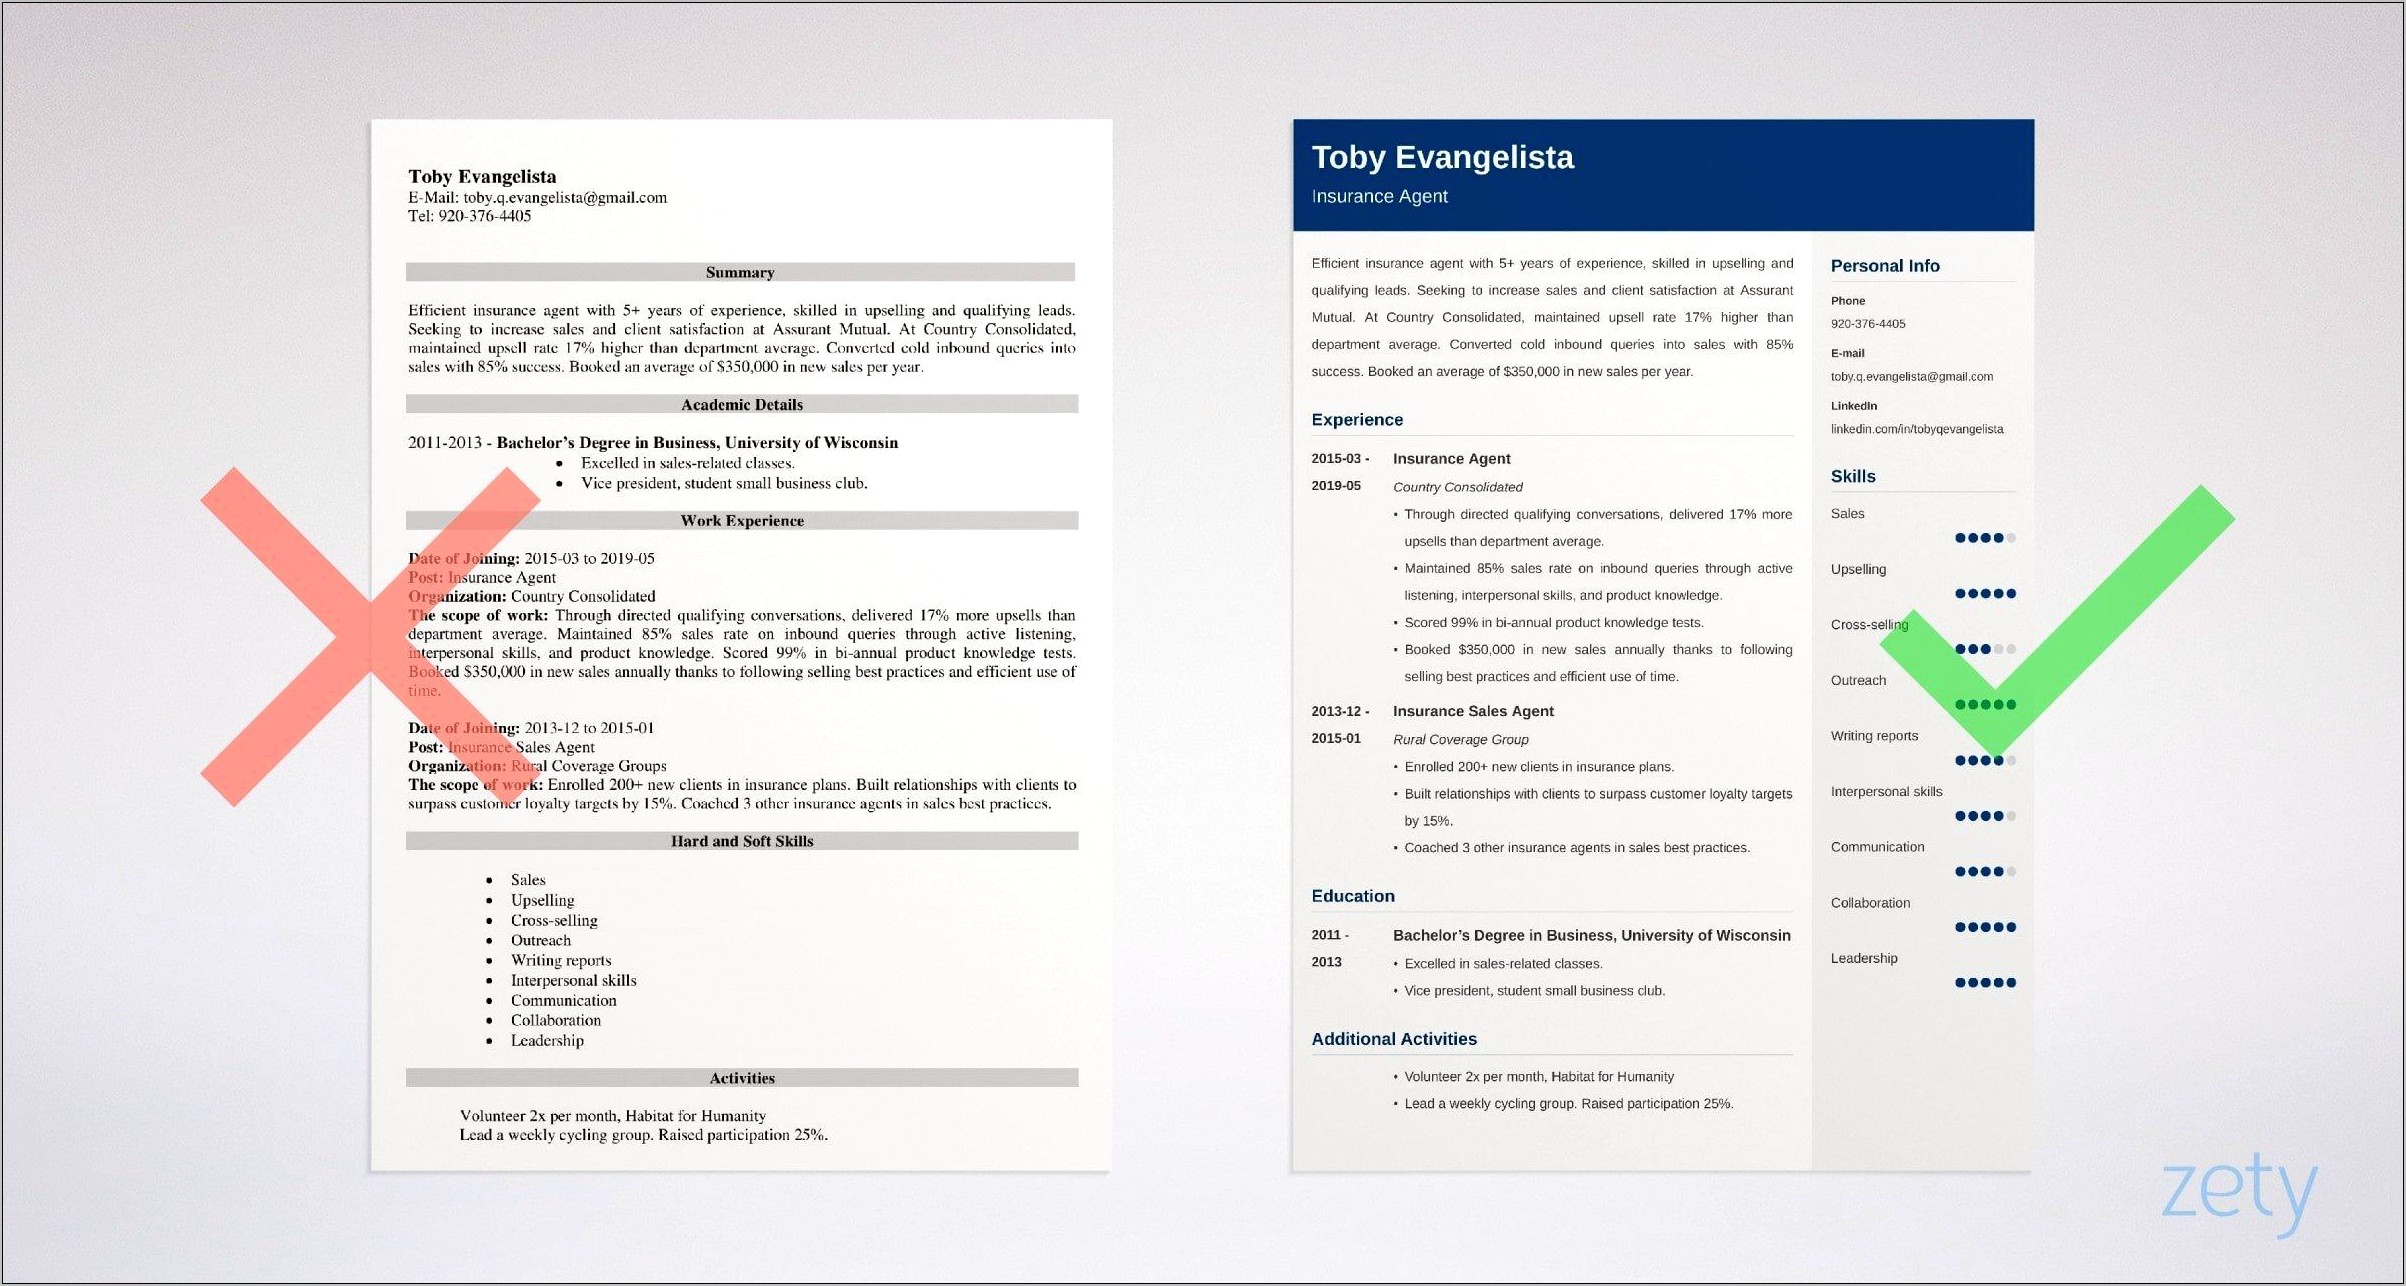 Independent Insurance Agent Sample Resume